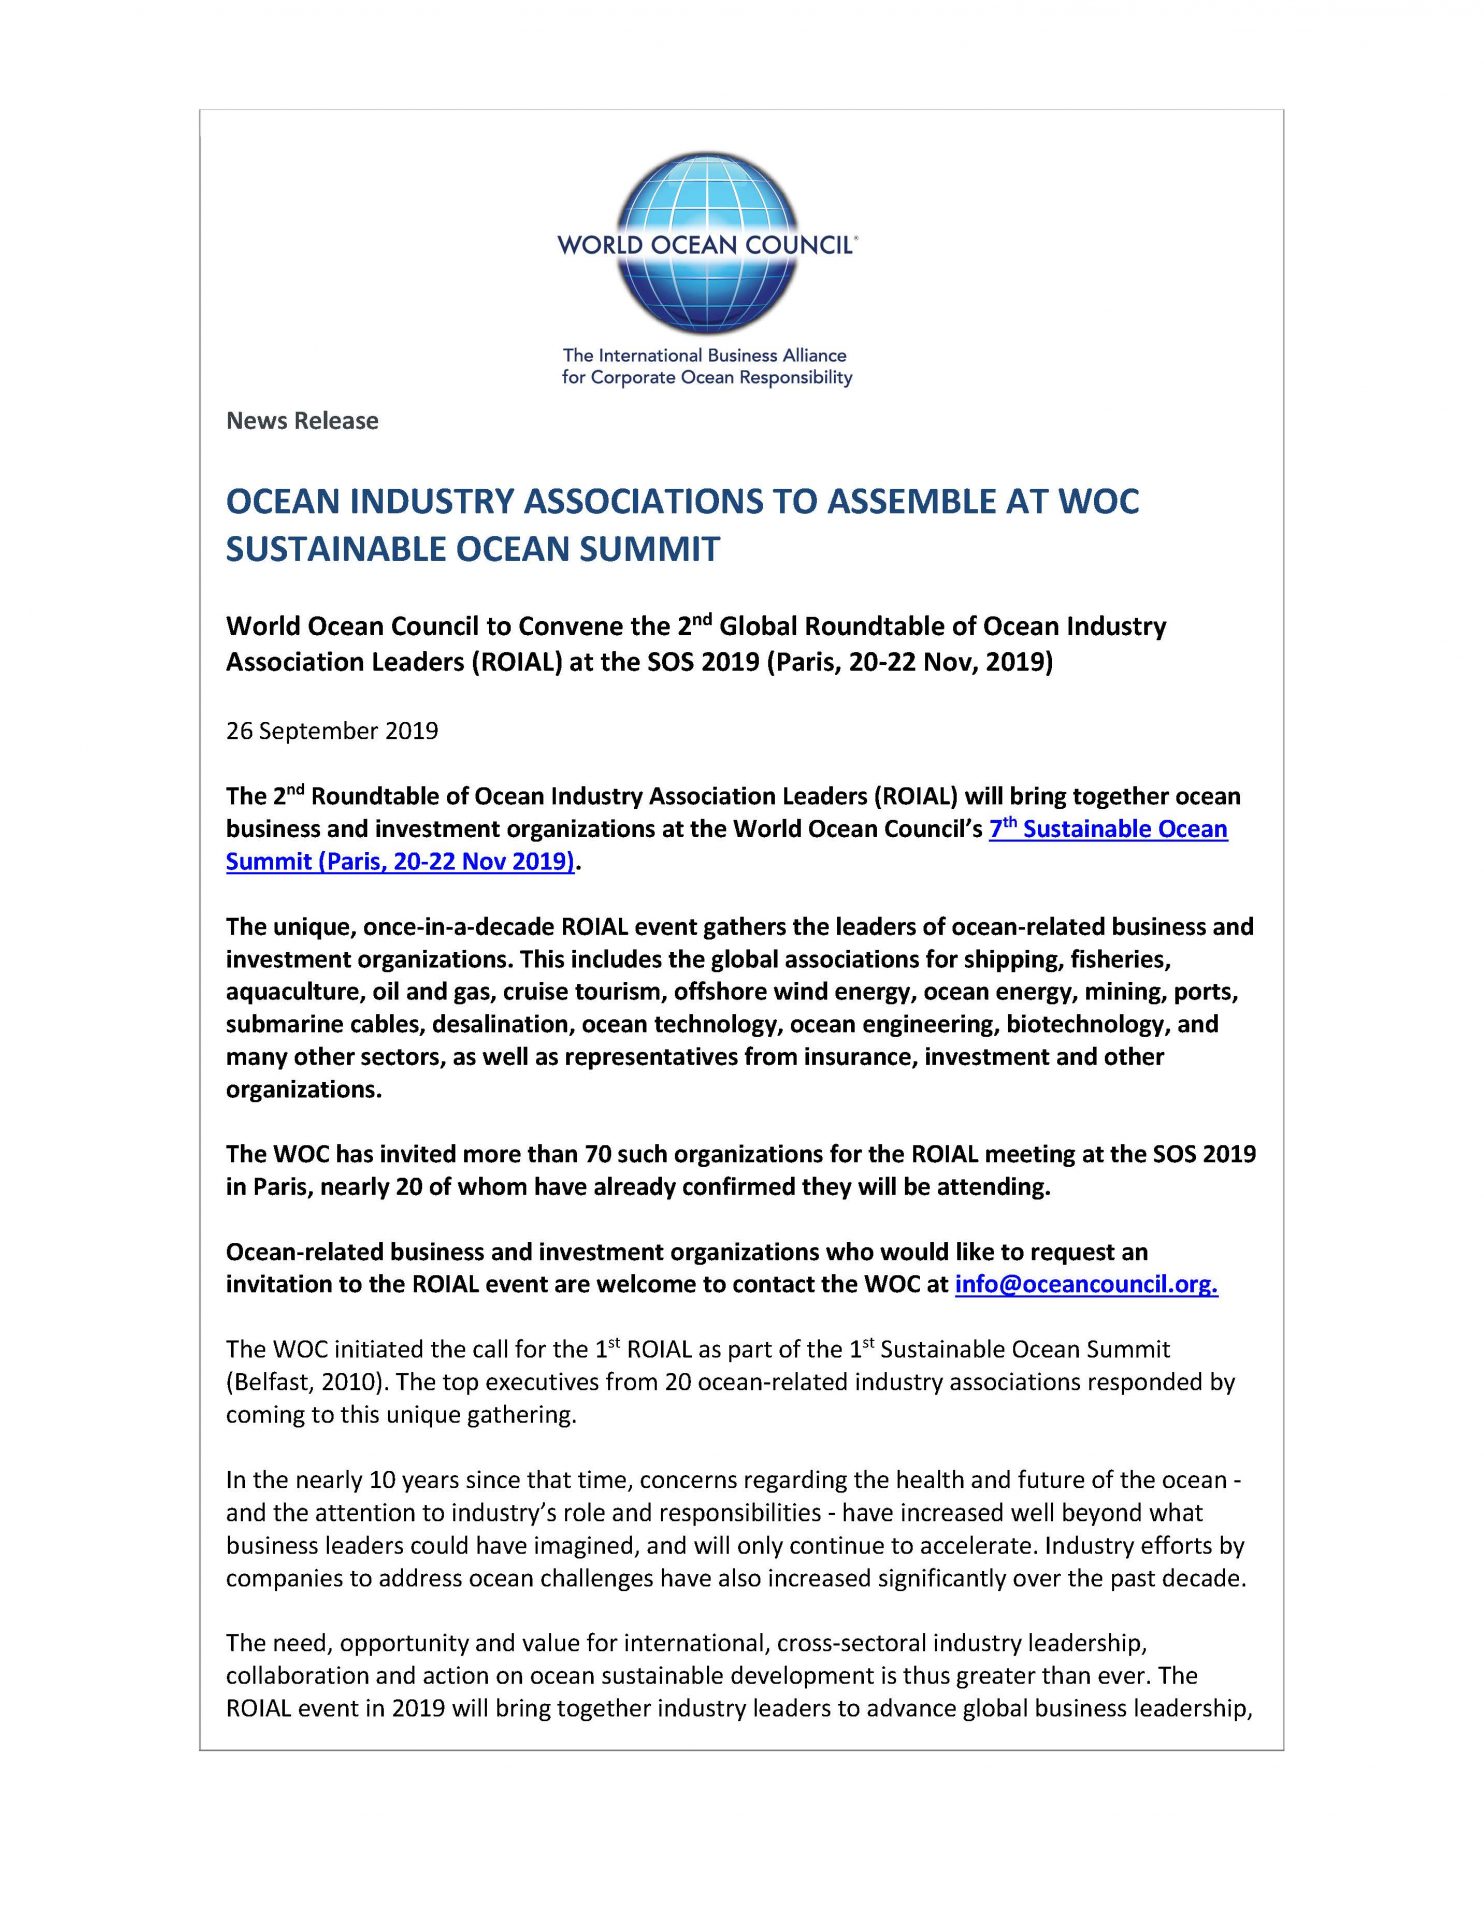 Ocean Industry Associations to Assemble at WOC Sustainable Ocean Summit - 26 September 2019